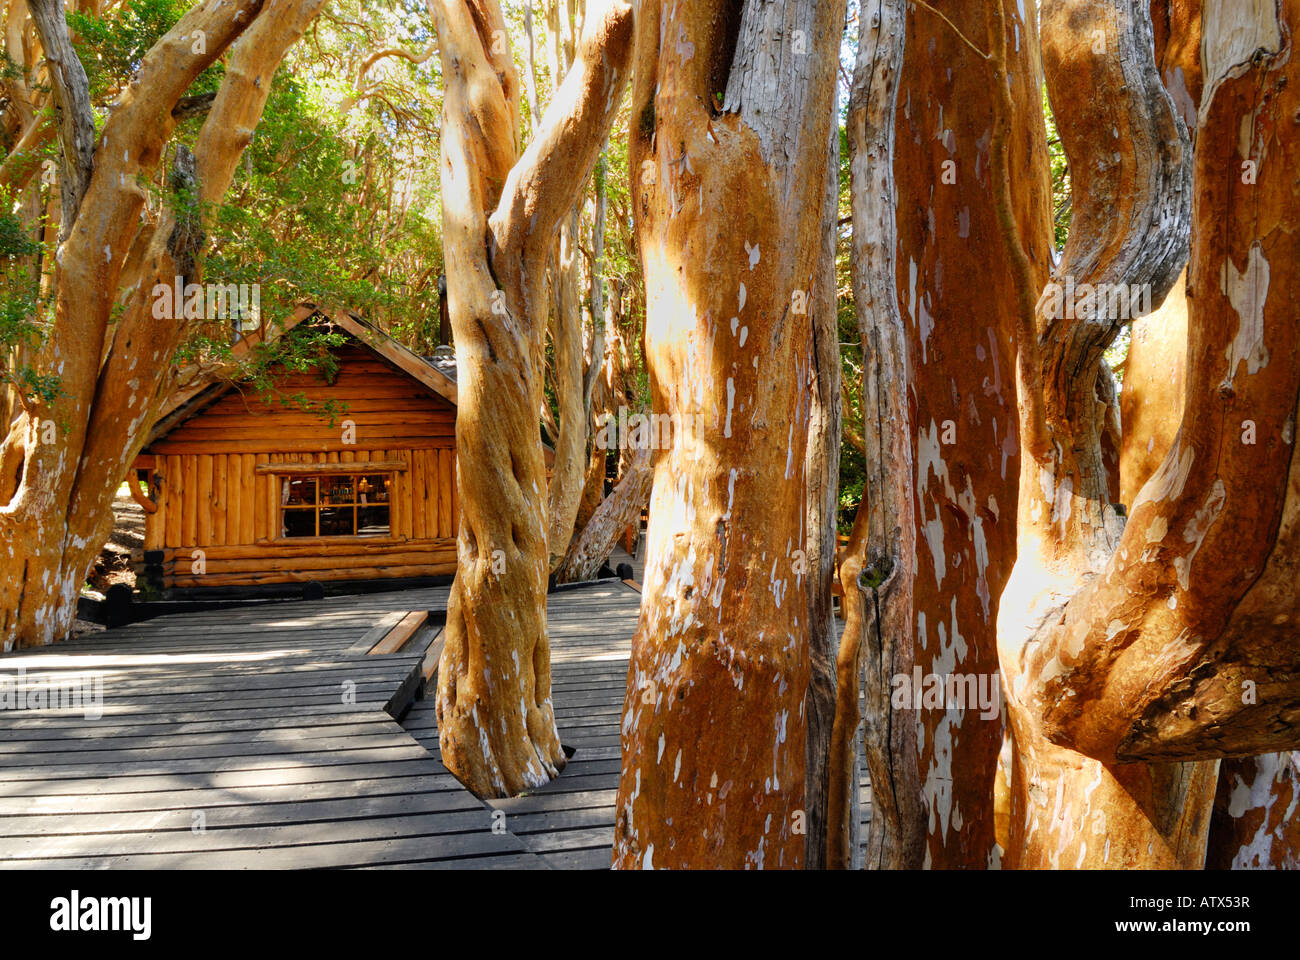 Old Cabin in the woods, Los Arrayanes National Park, Peninsula de Quetrihue, Neuquen, Argentina, South America Stock Photo